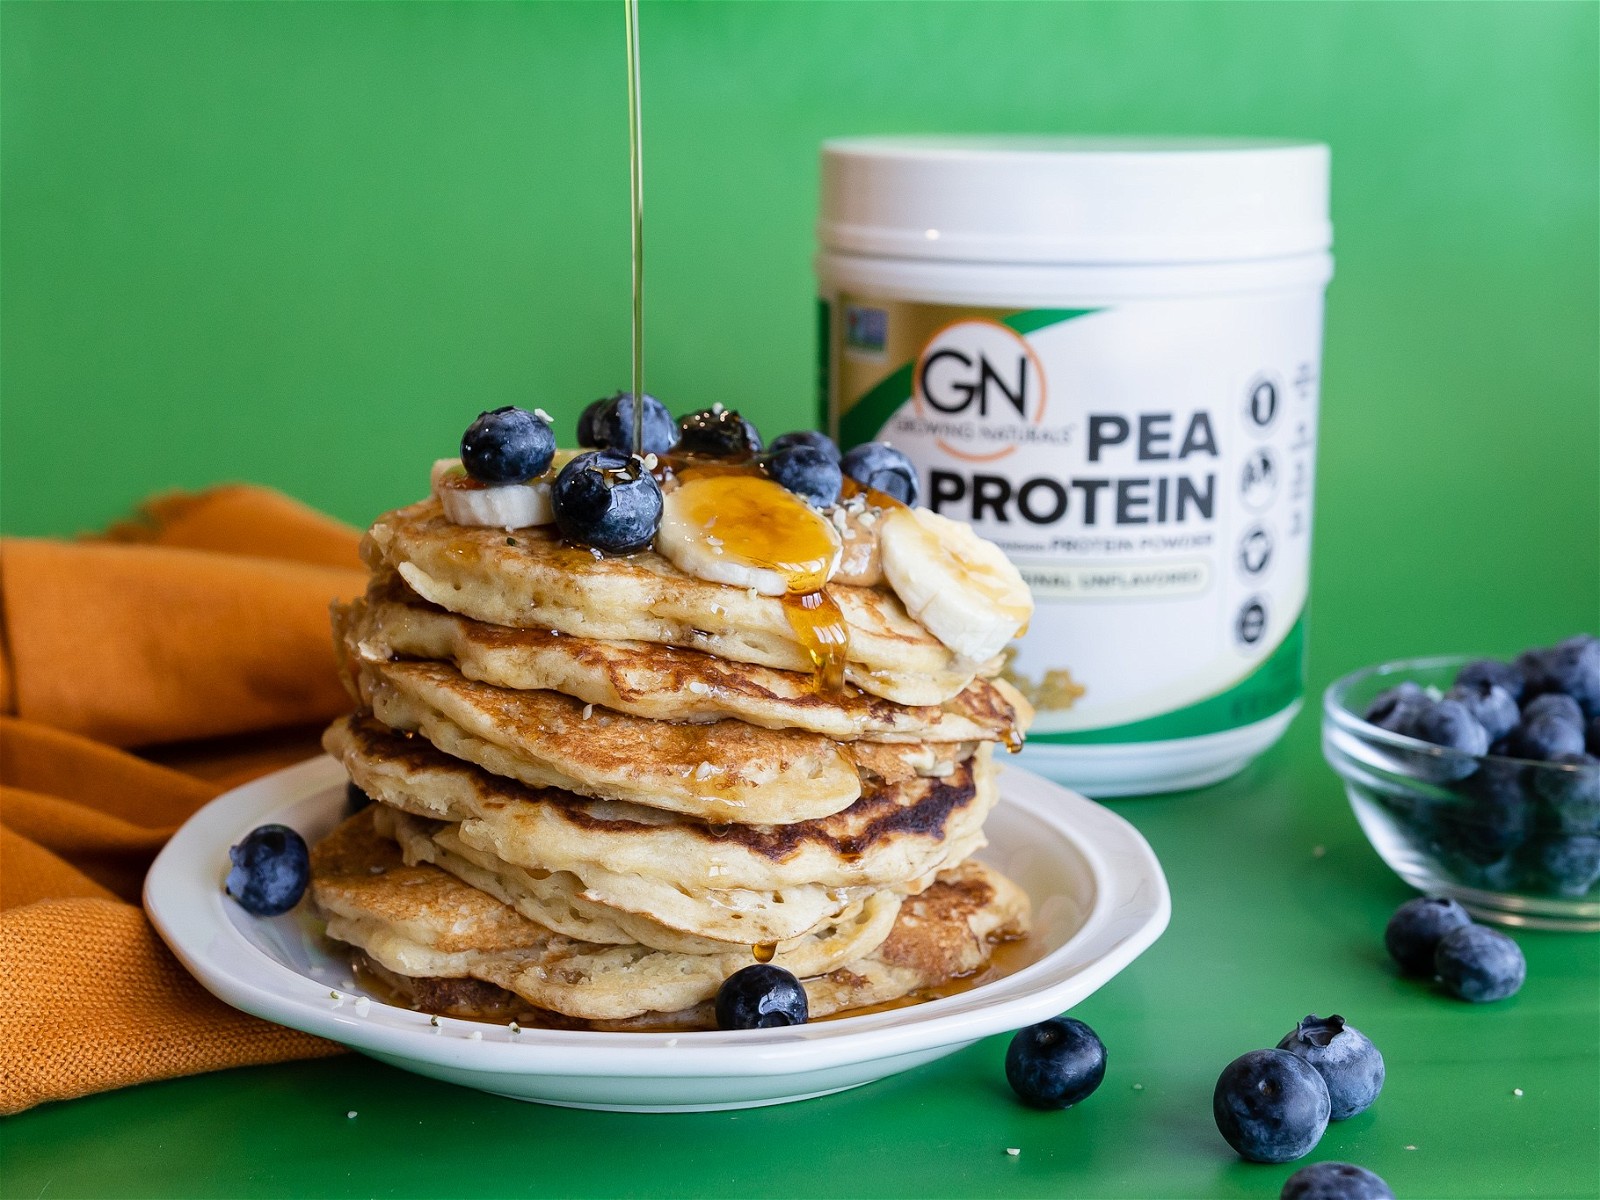 Fluffy pea protein pancakes – Growing Naturals